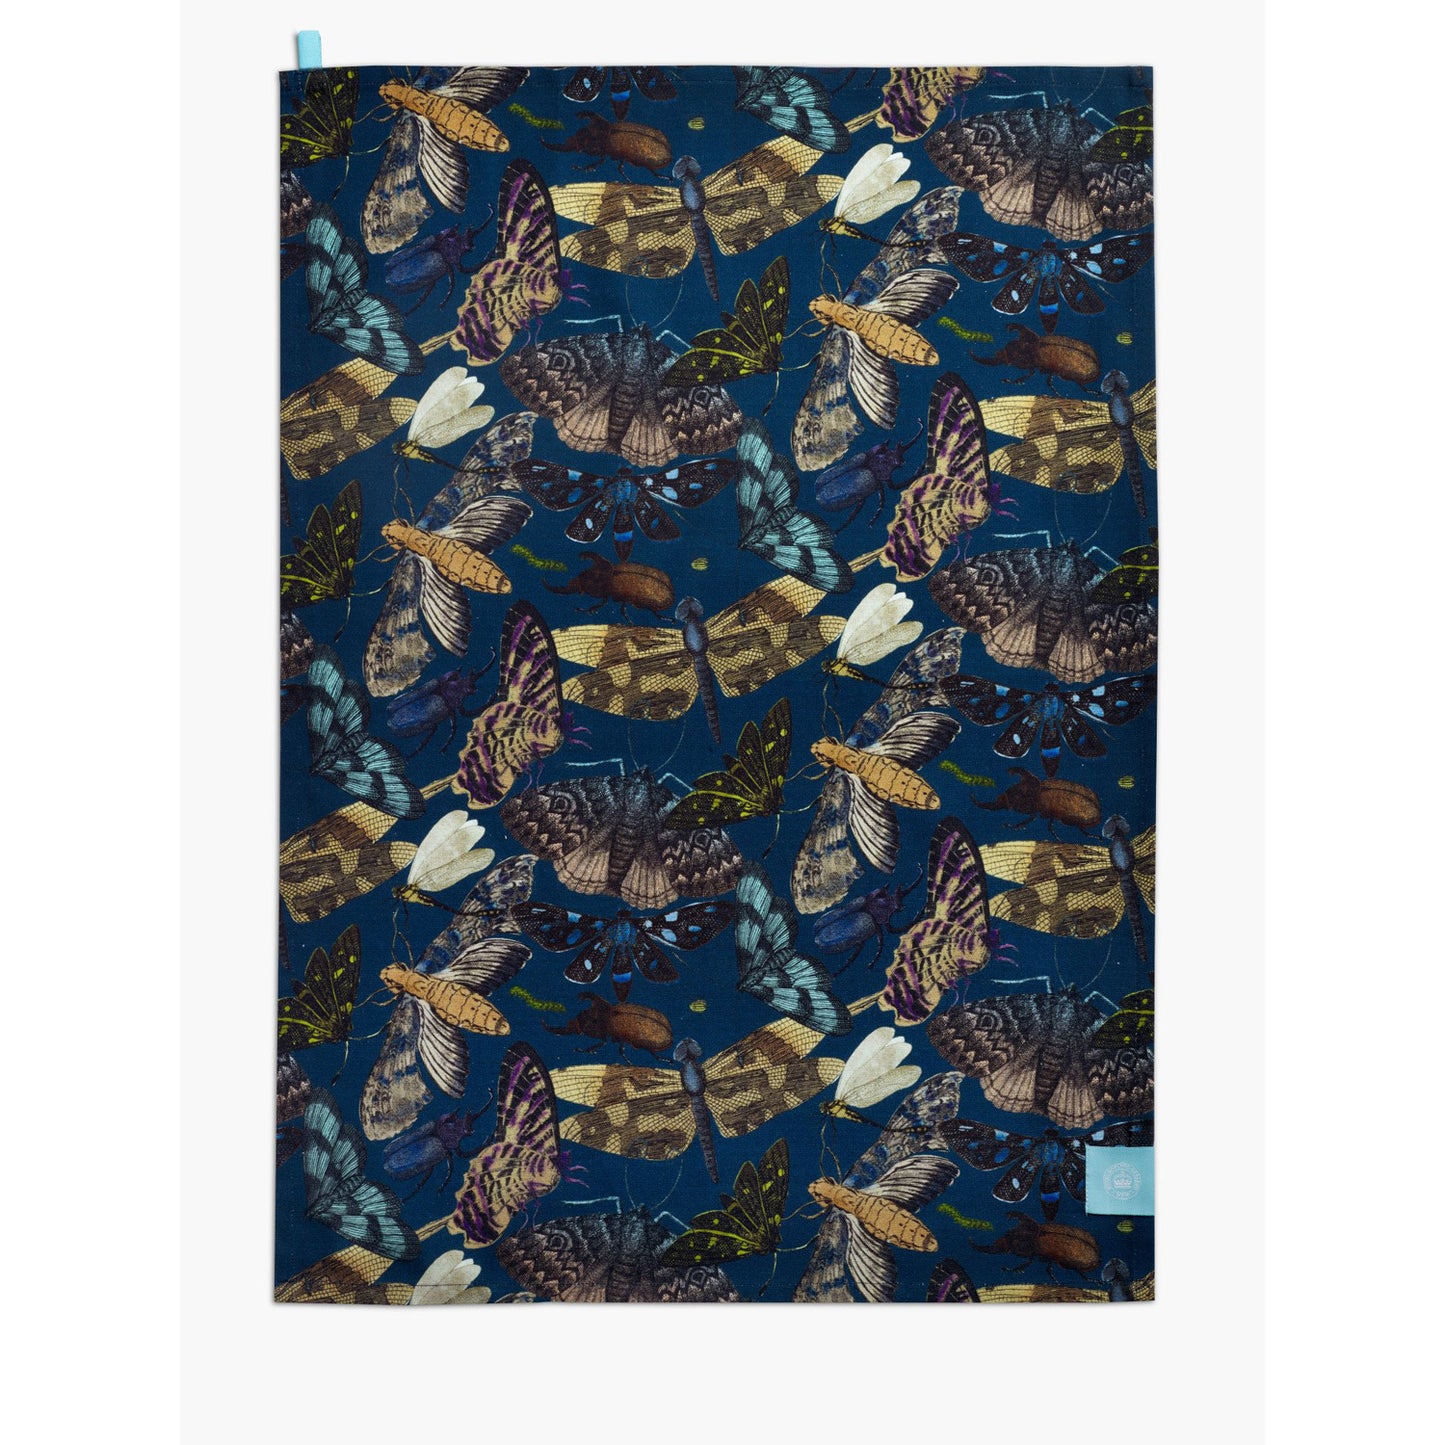 Tea towel with detailed illustration of moths and butterflies, on a blue background, from Kew Gardens available from Vinegar Hill.